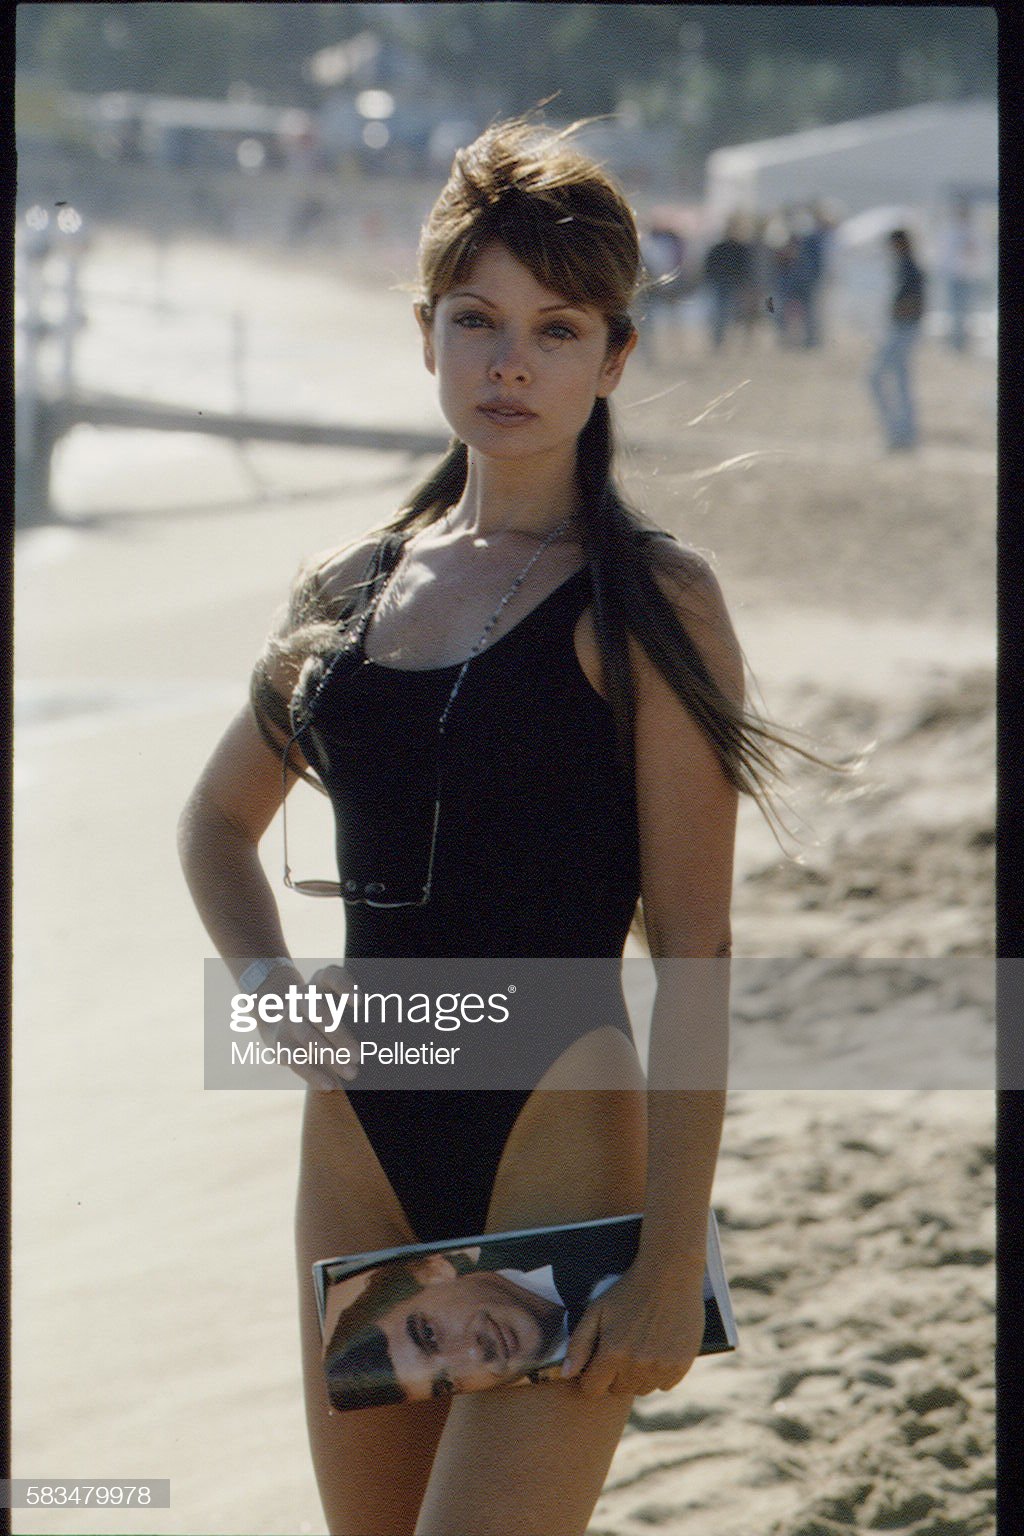 The actress Marjorie Andrade, Senna’s former fiancée, in Cannes, France, in 1994. 